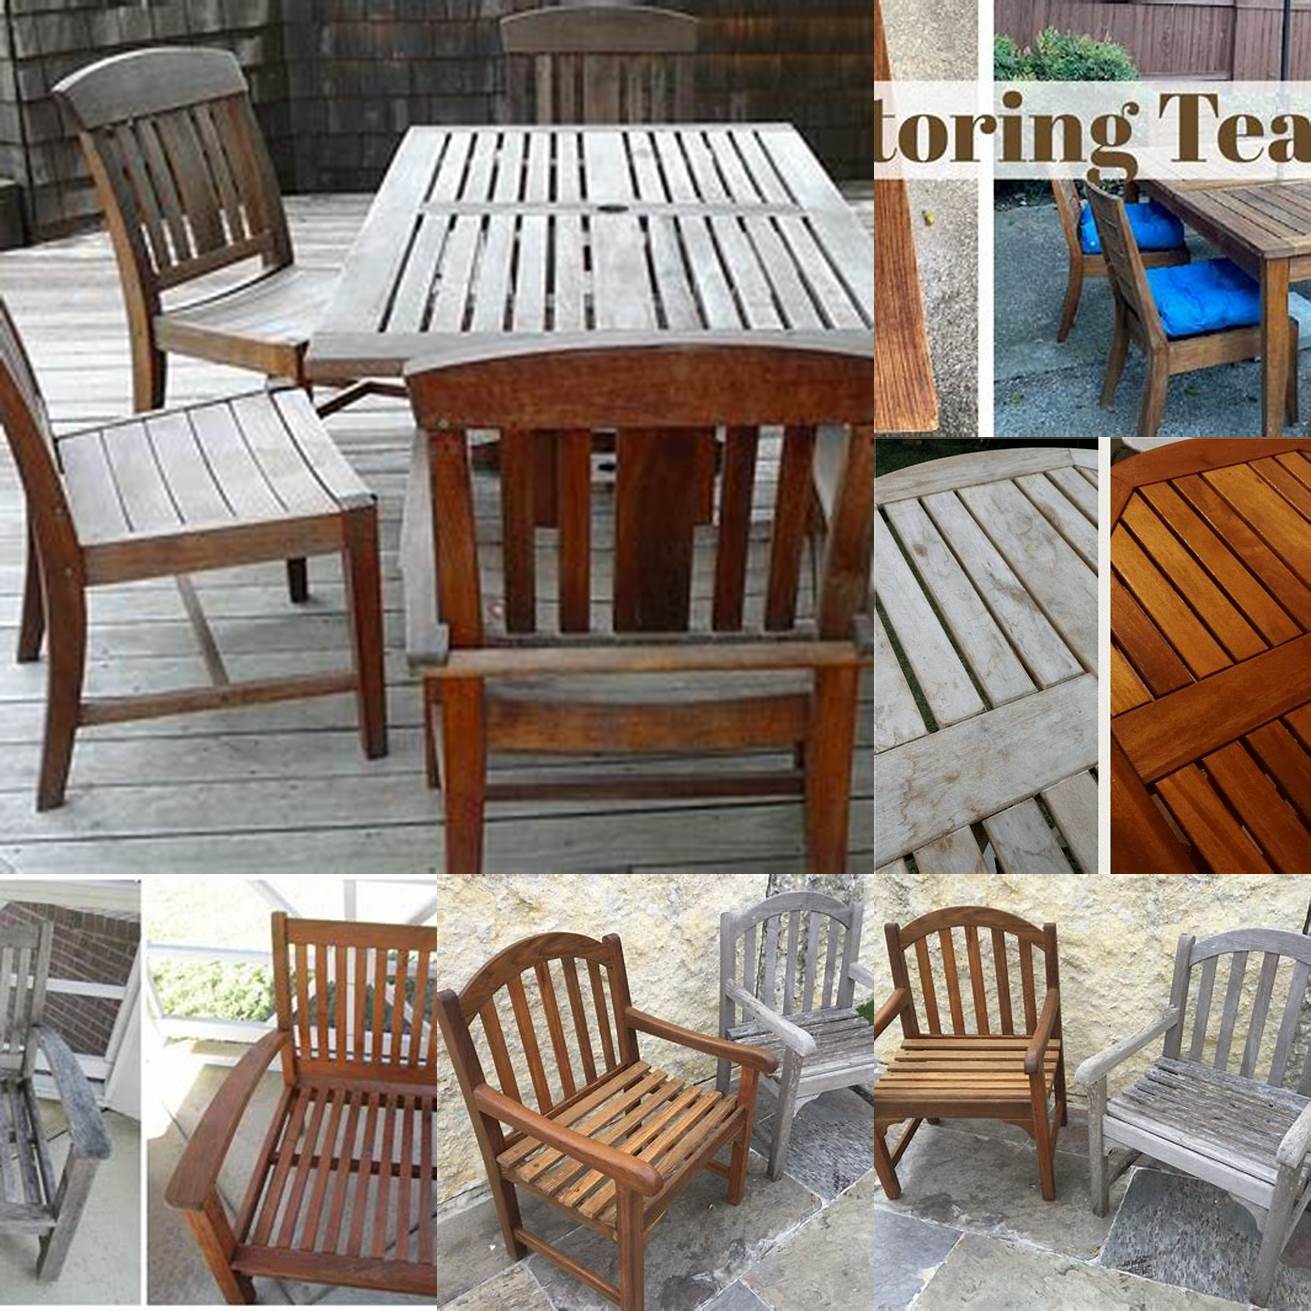 Teak Furniture Before and After